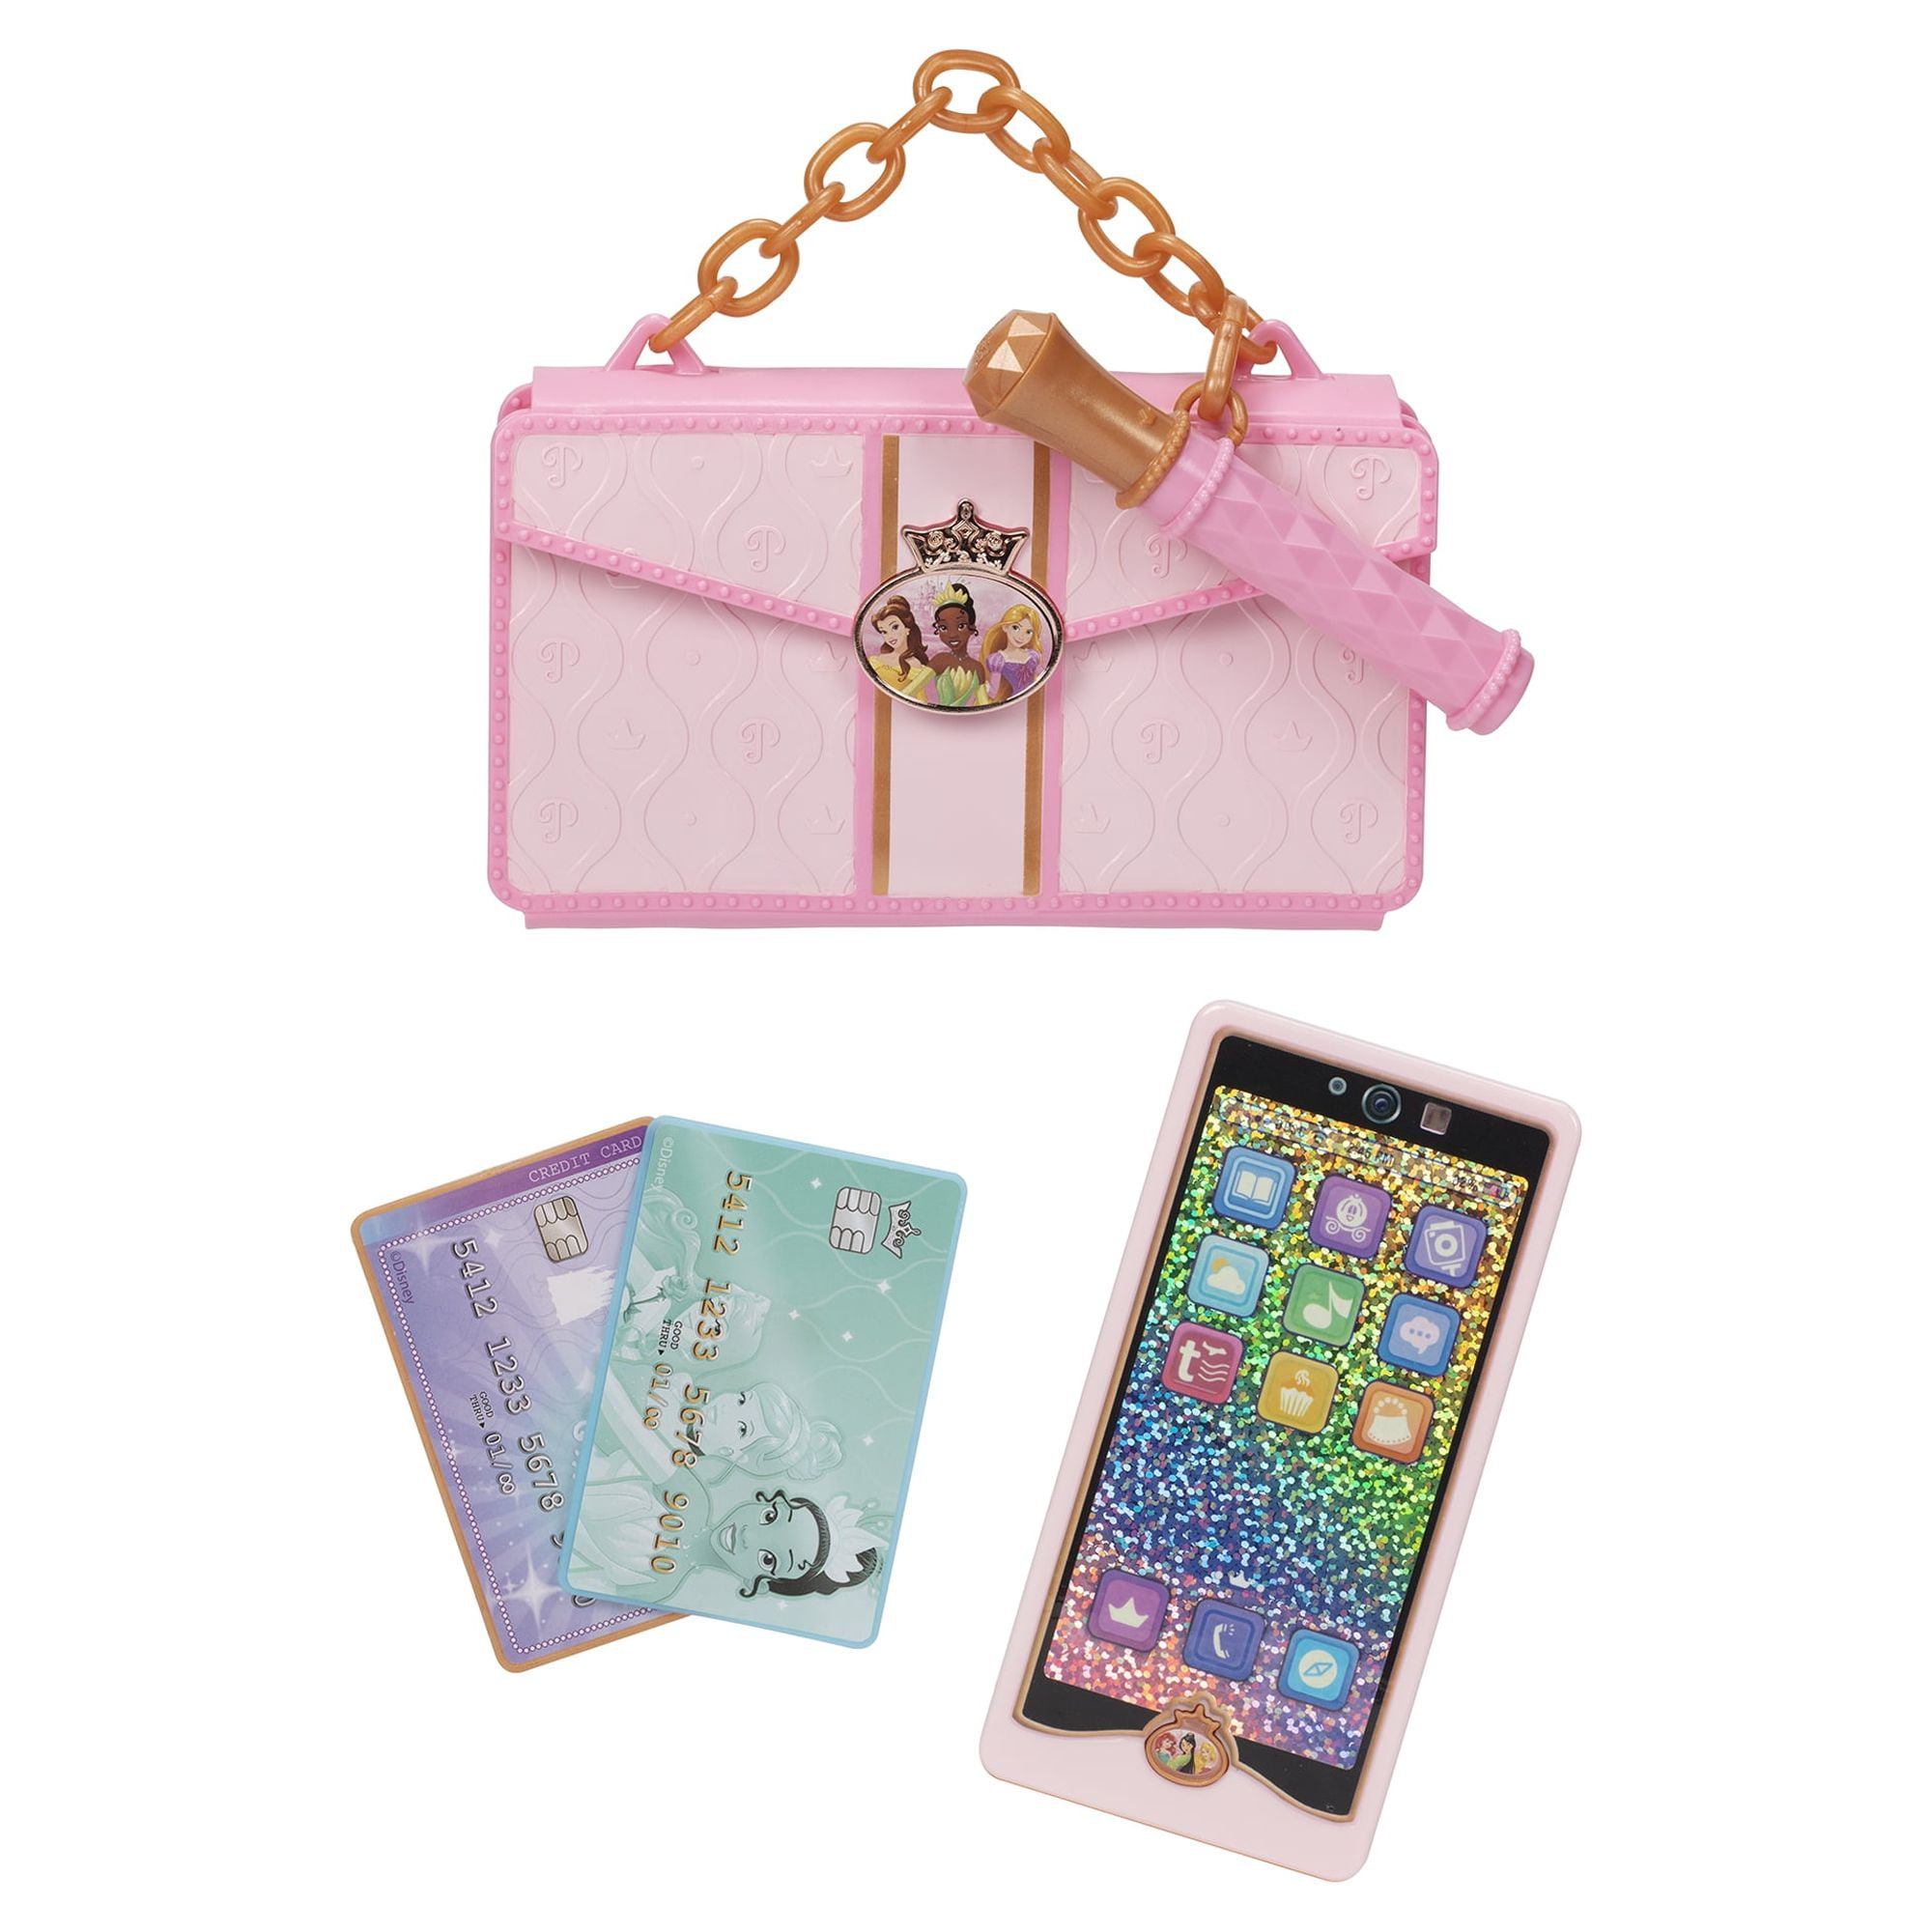 Amazon.com: Play Purse for Little Girls and Toddlers - Girls Toys Pretend  Play Accessories: Toy Phone, Wallet, Credit Cards, Keys, Pretend Makeup for  Role Playing Toys for Girls Ages 3 4 5